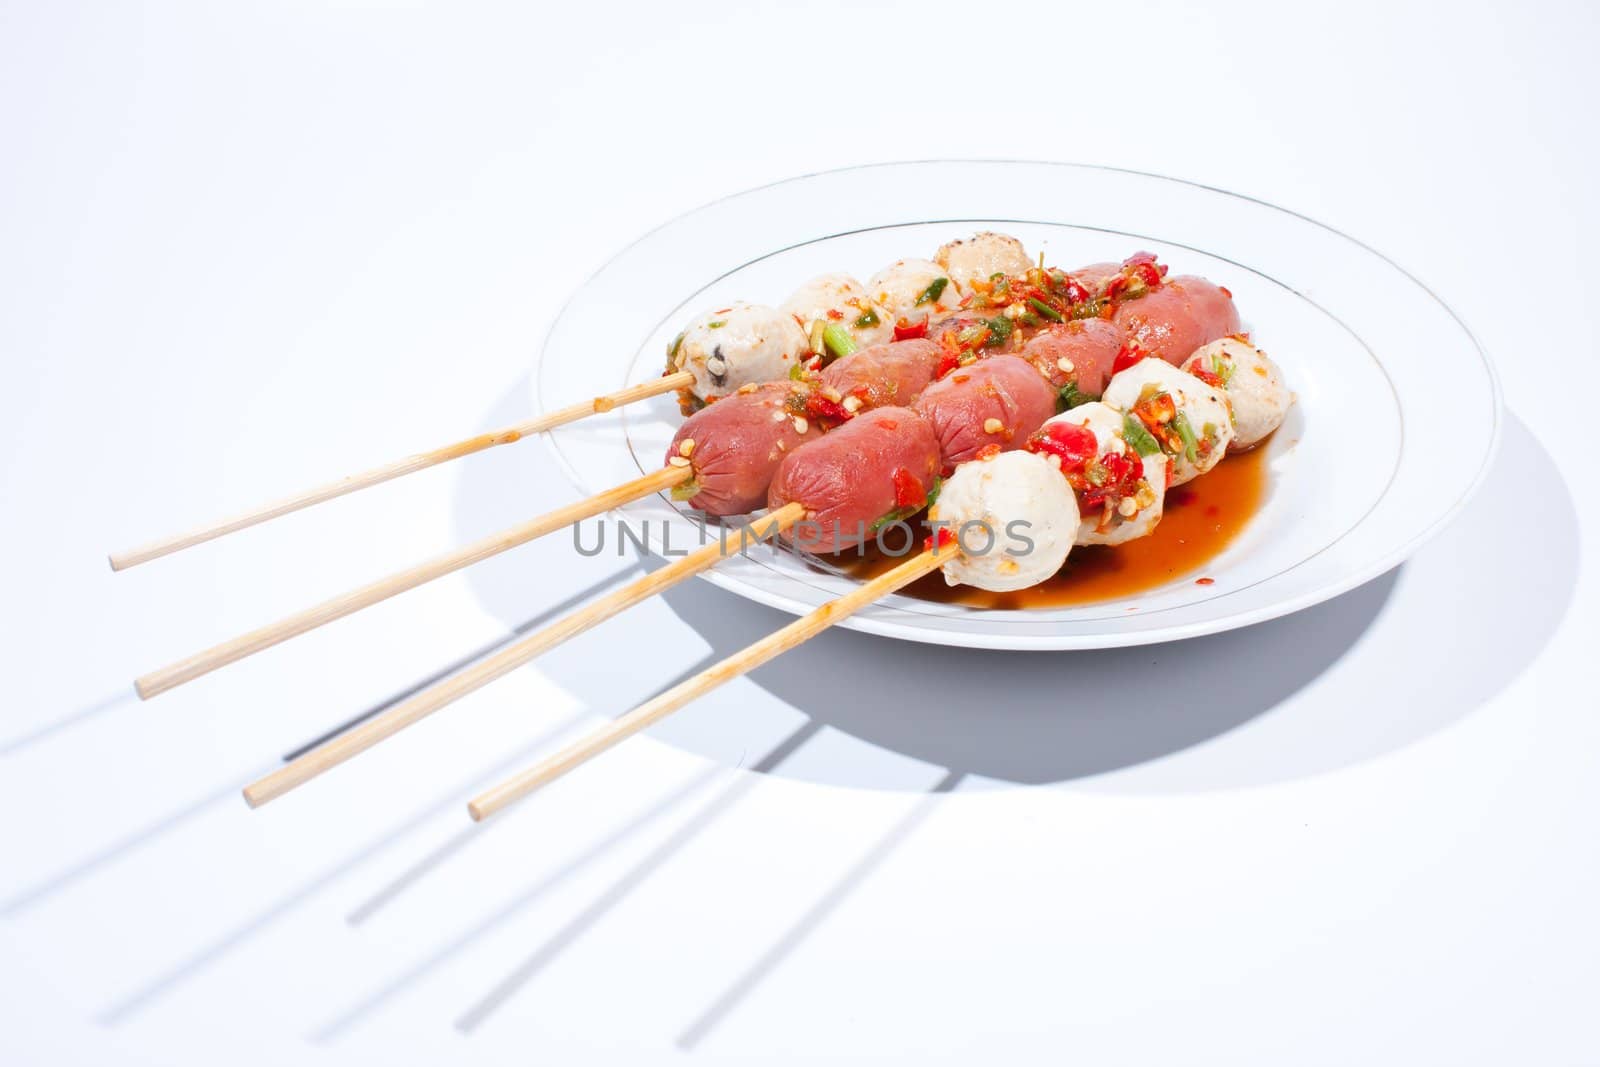 Pour sauce meatball skewers grill plate on a white background.